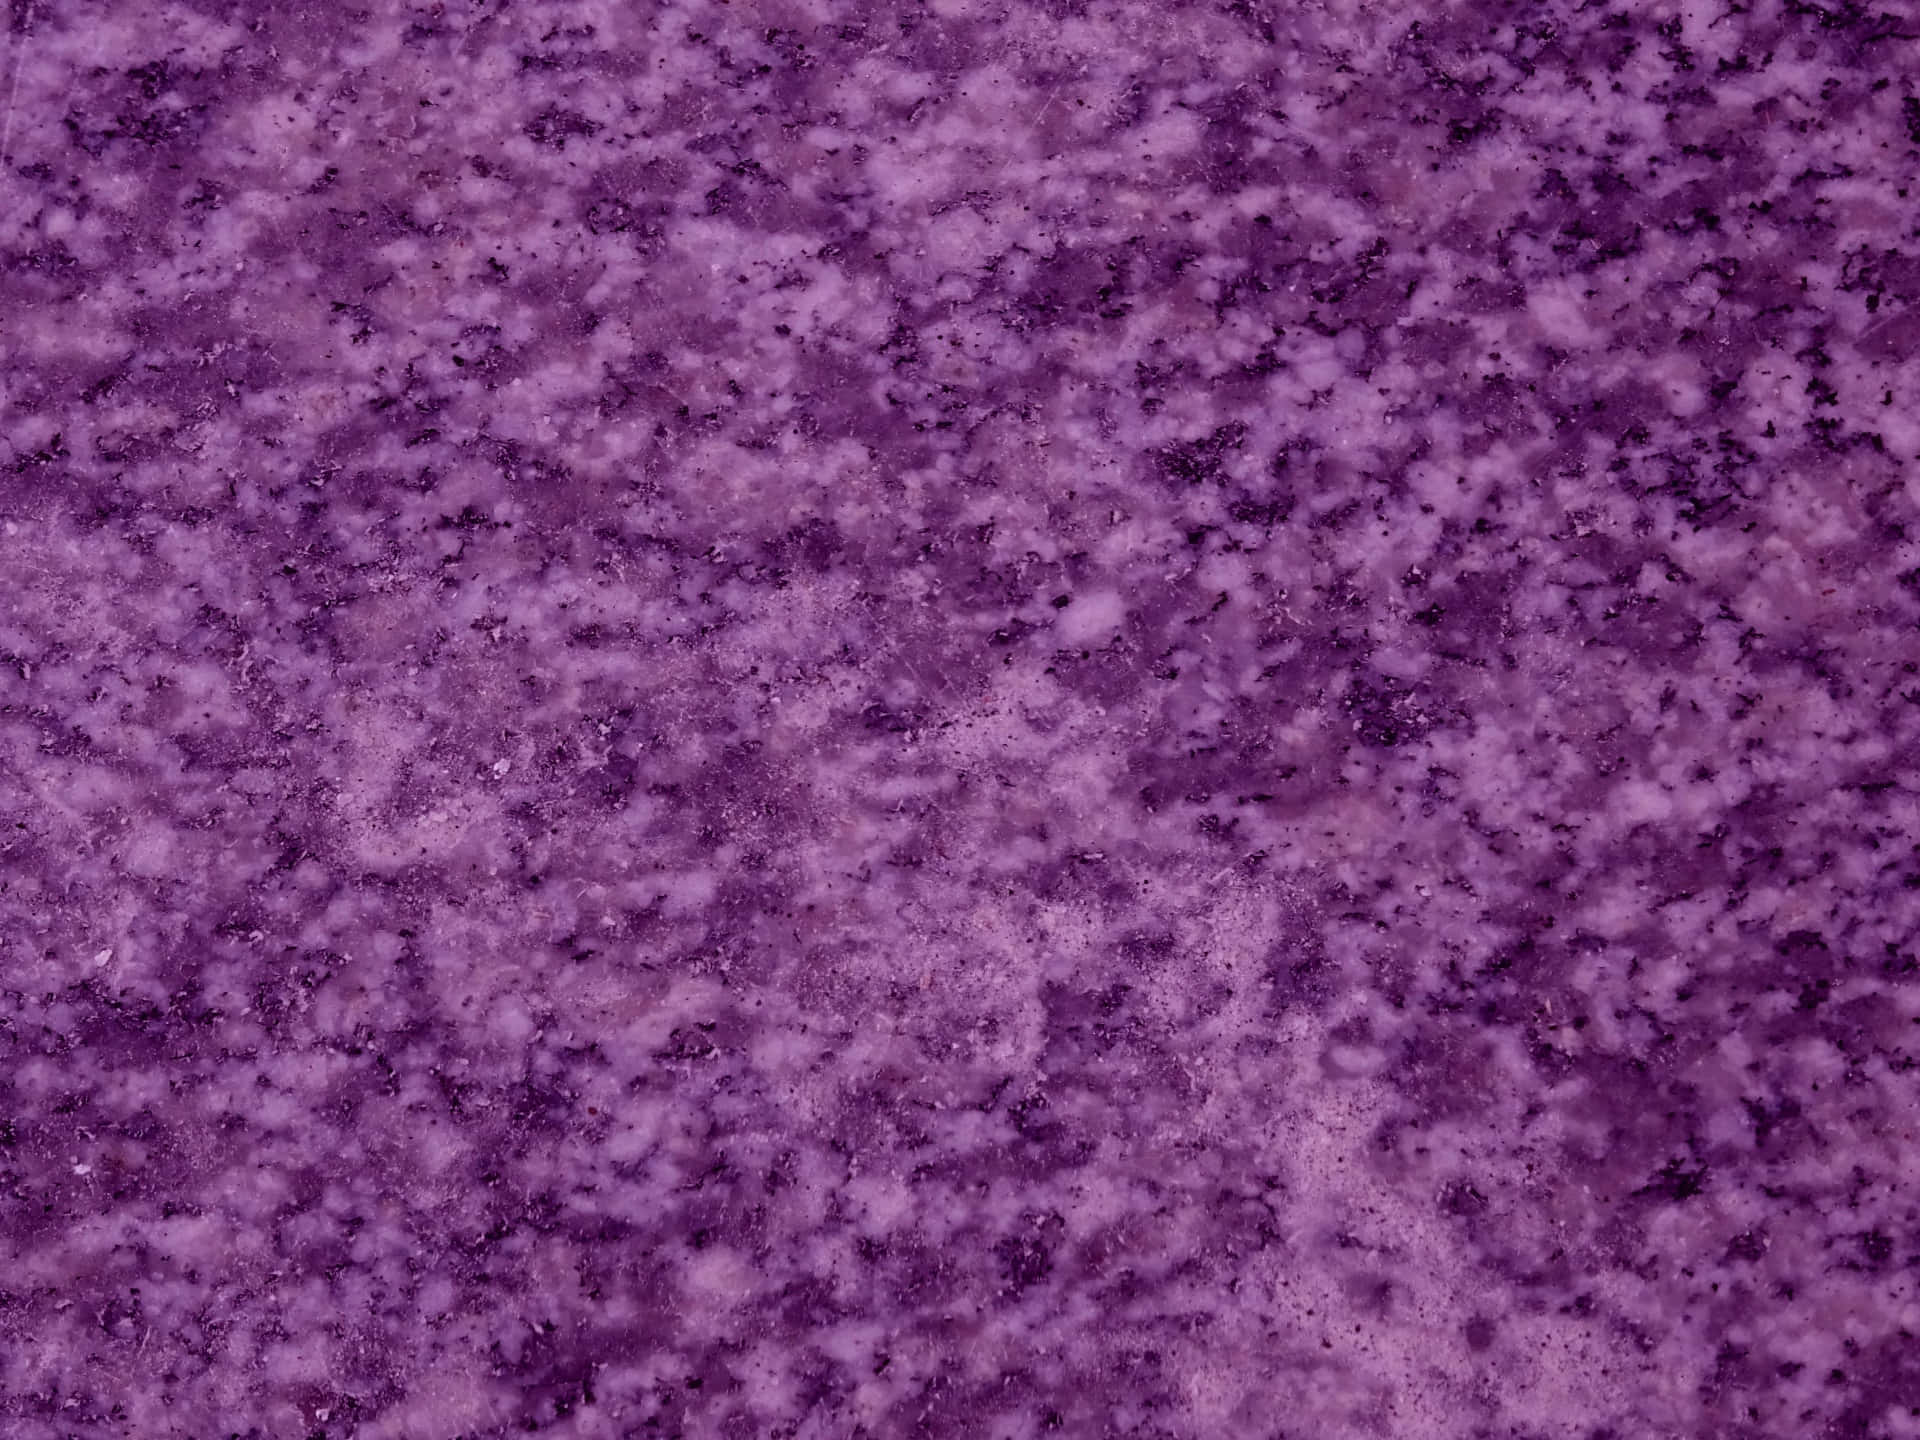 Subtle and serene, this purple marble wallpaper provides a relaxing backdrop